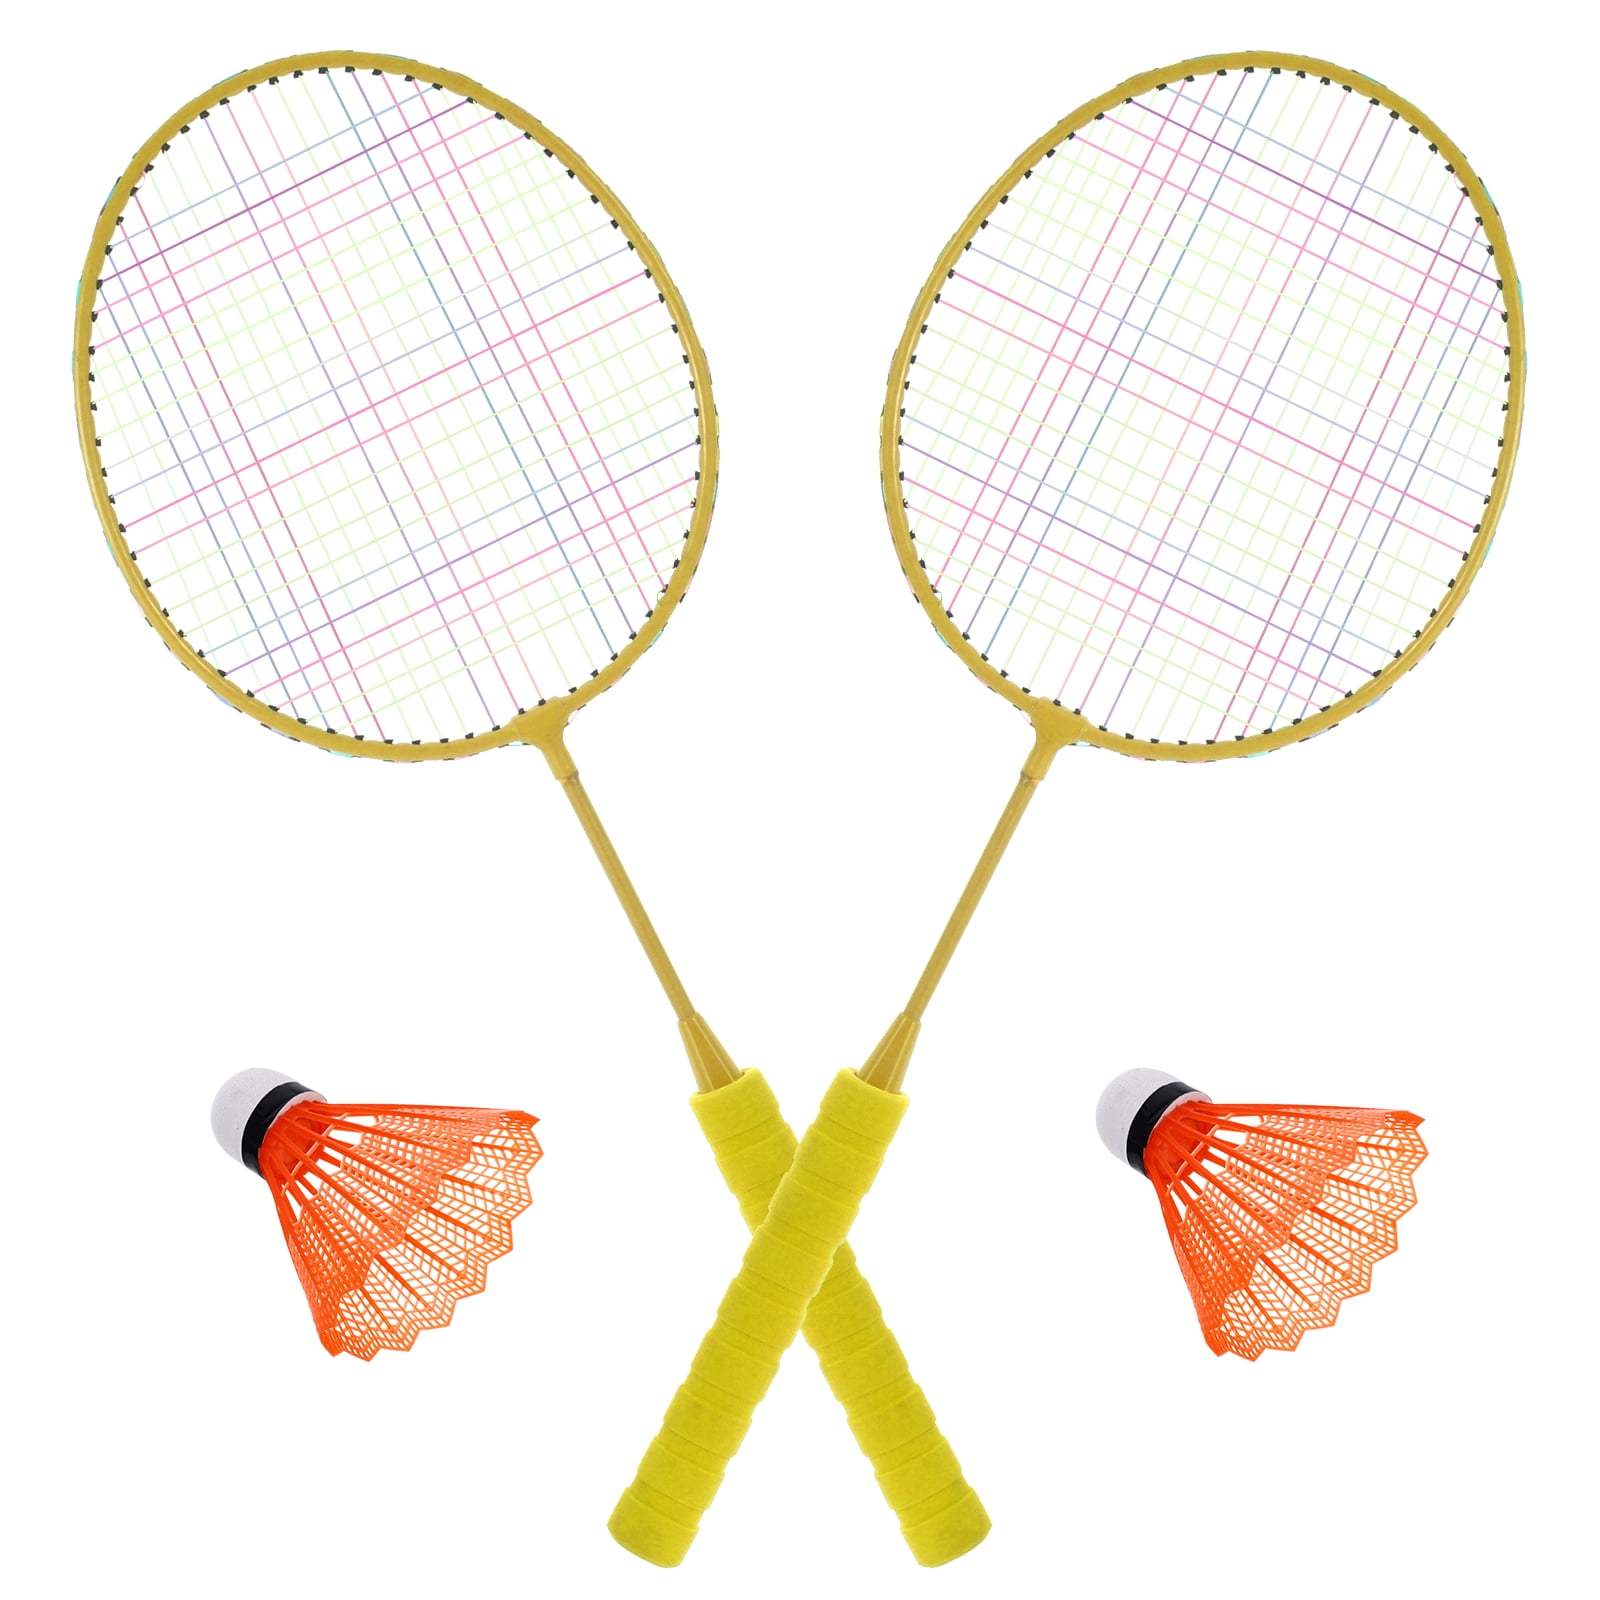 1 Set Children Badminton Rackets Outdoor Sports for Kids of 3-12 Years Old 